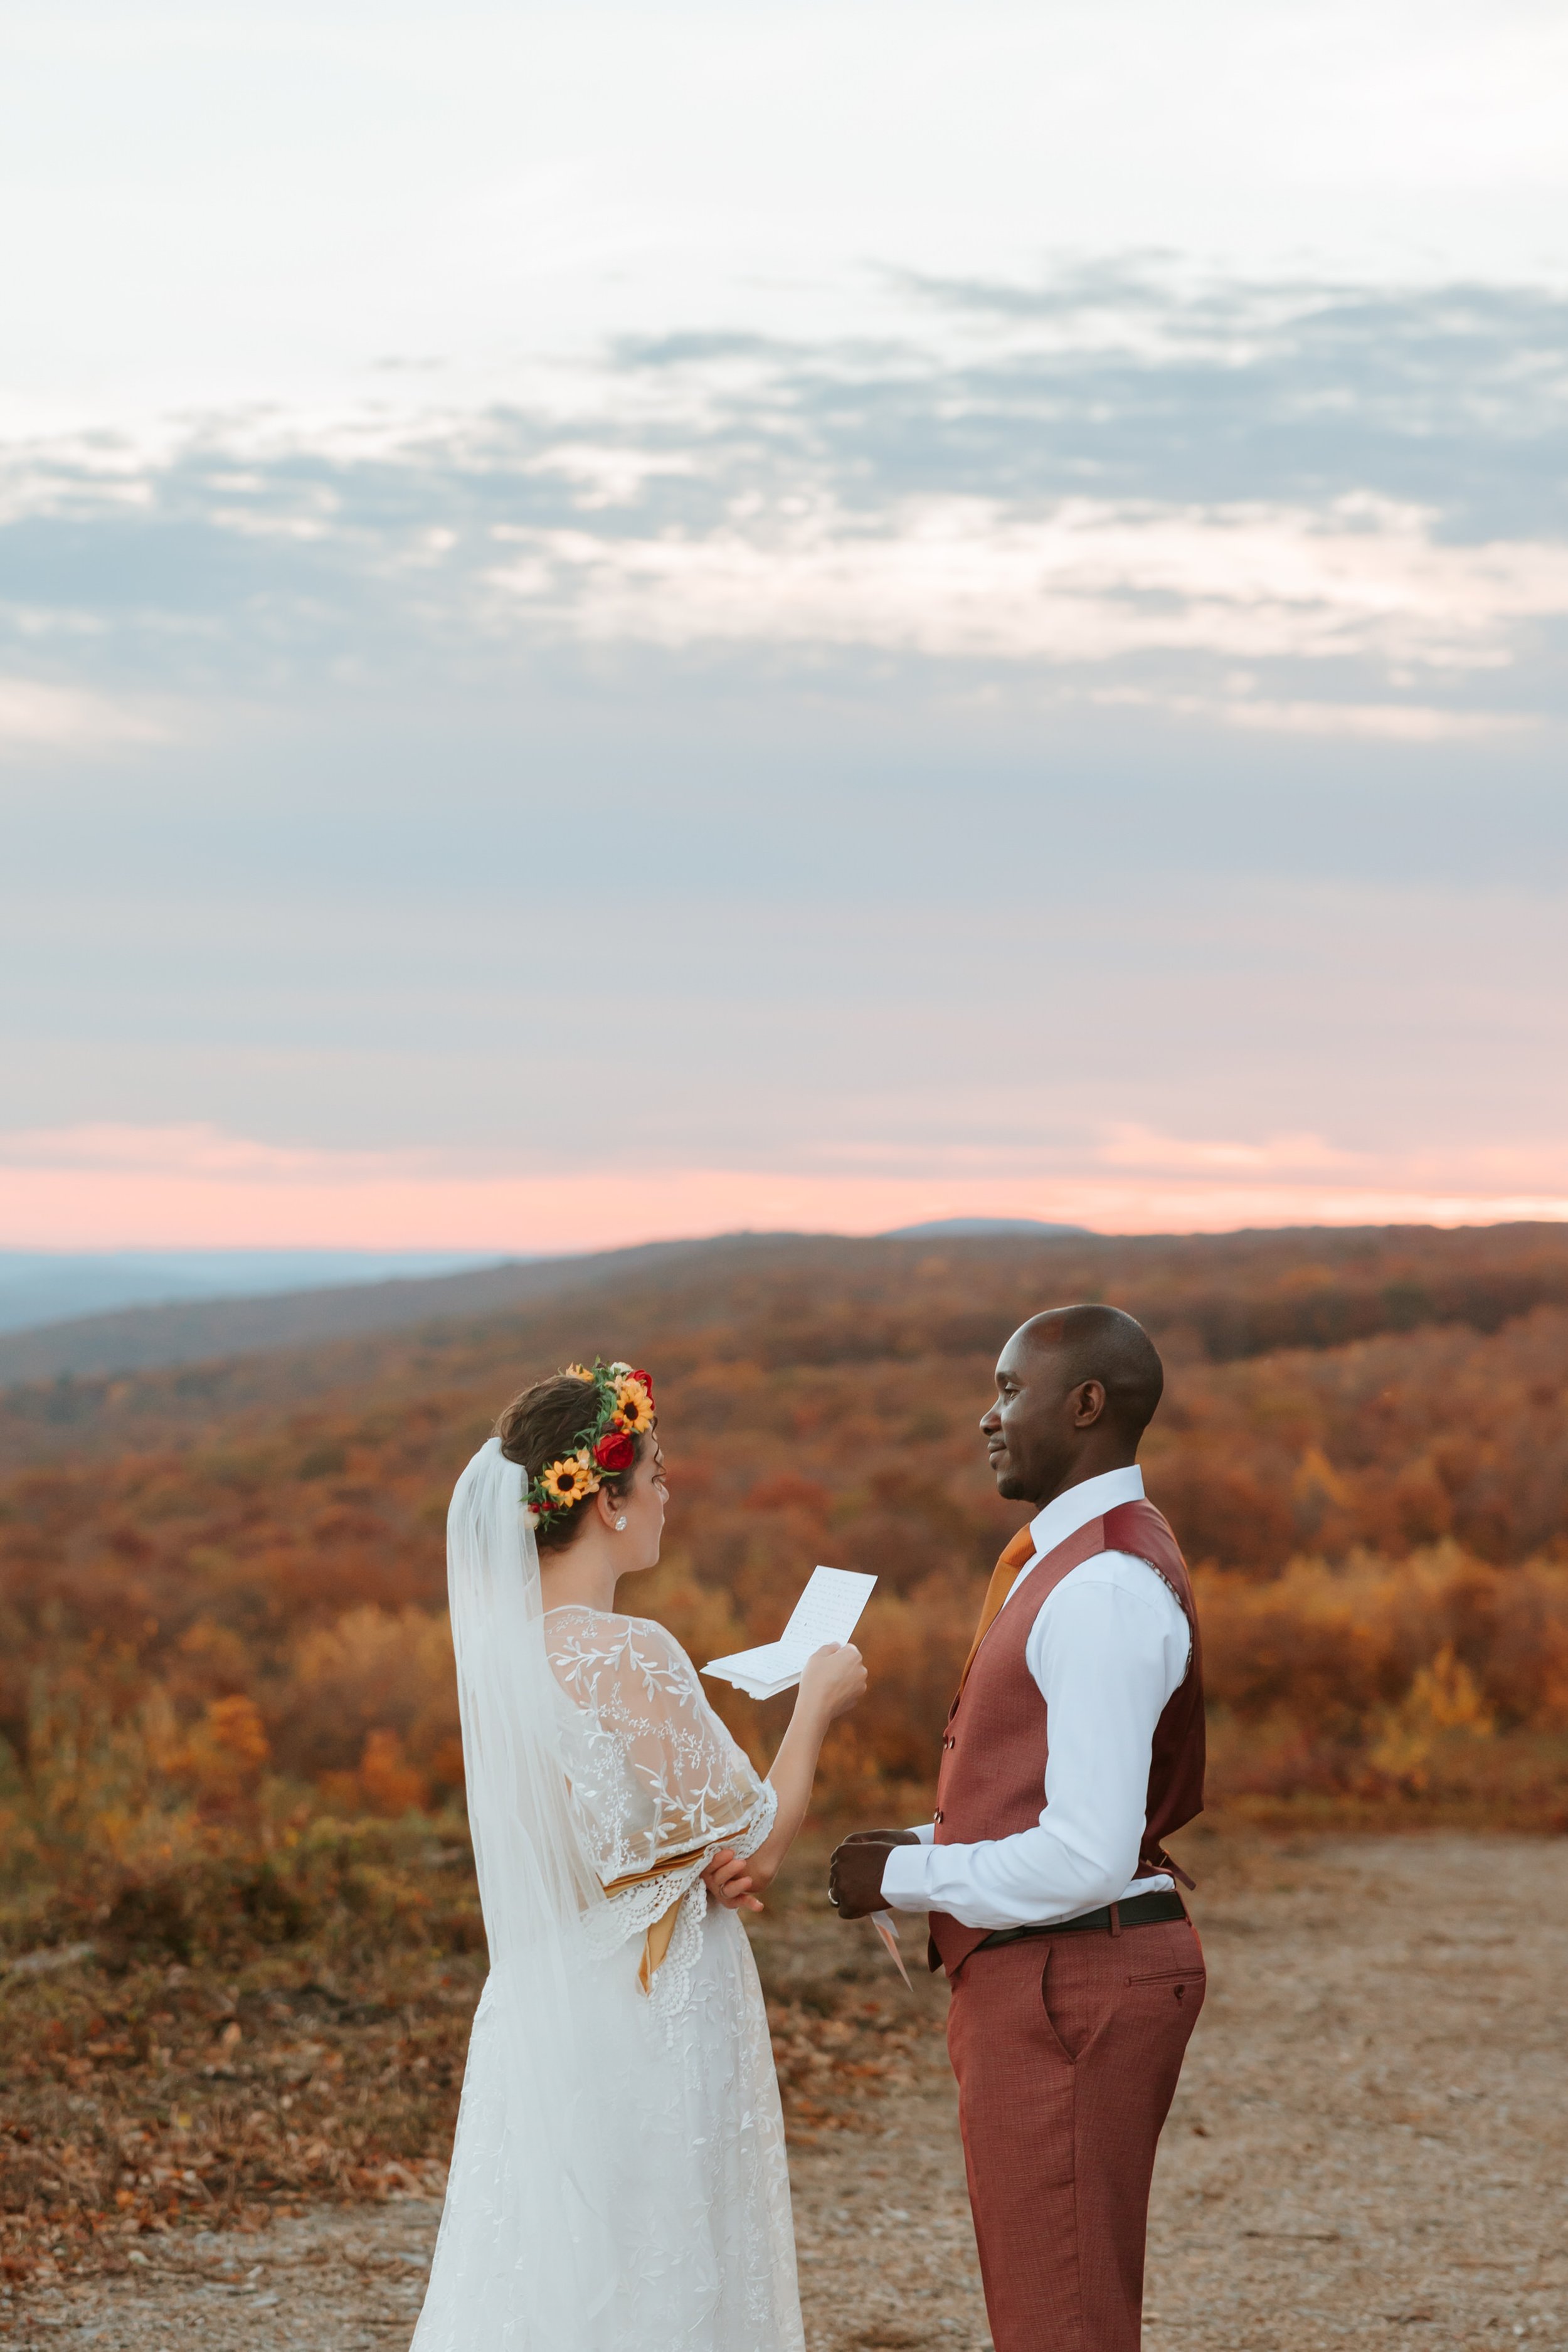 A bride and groom exchange vows in the mountains at sunset.